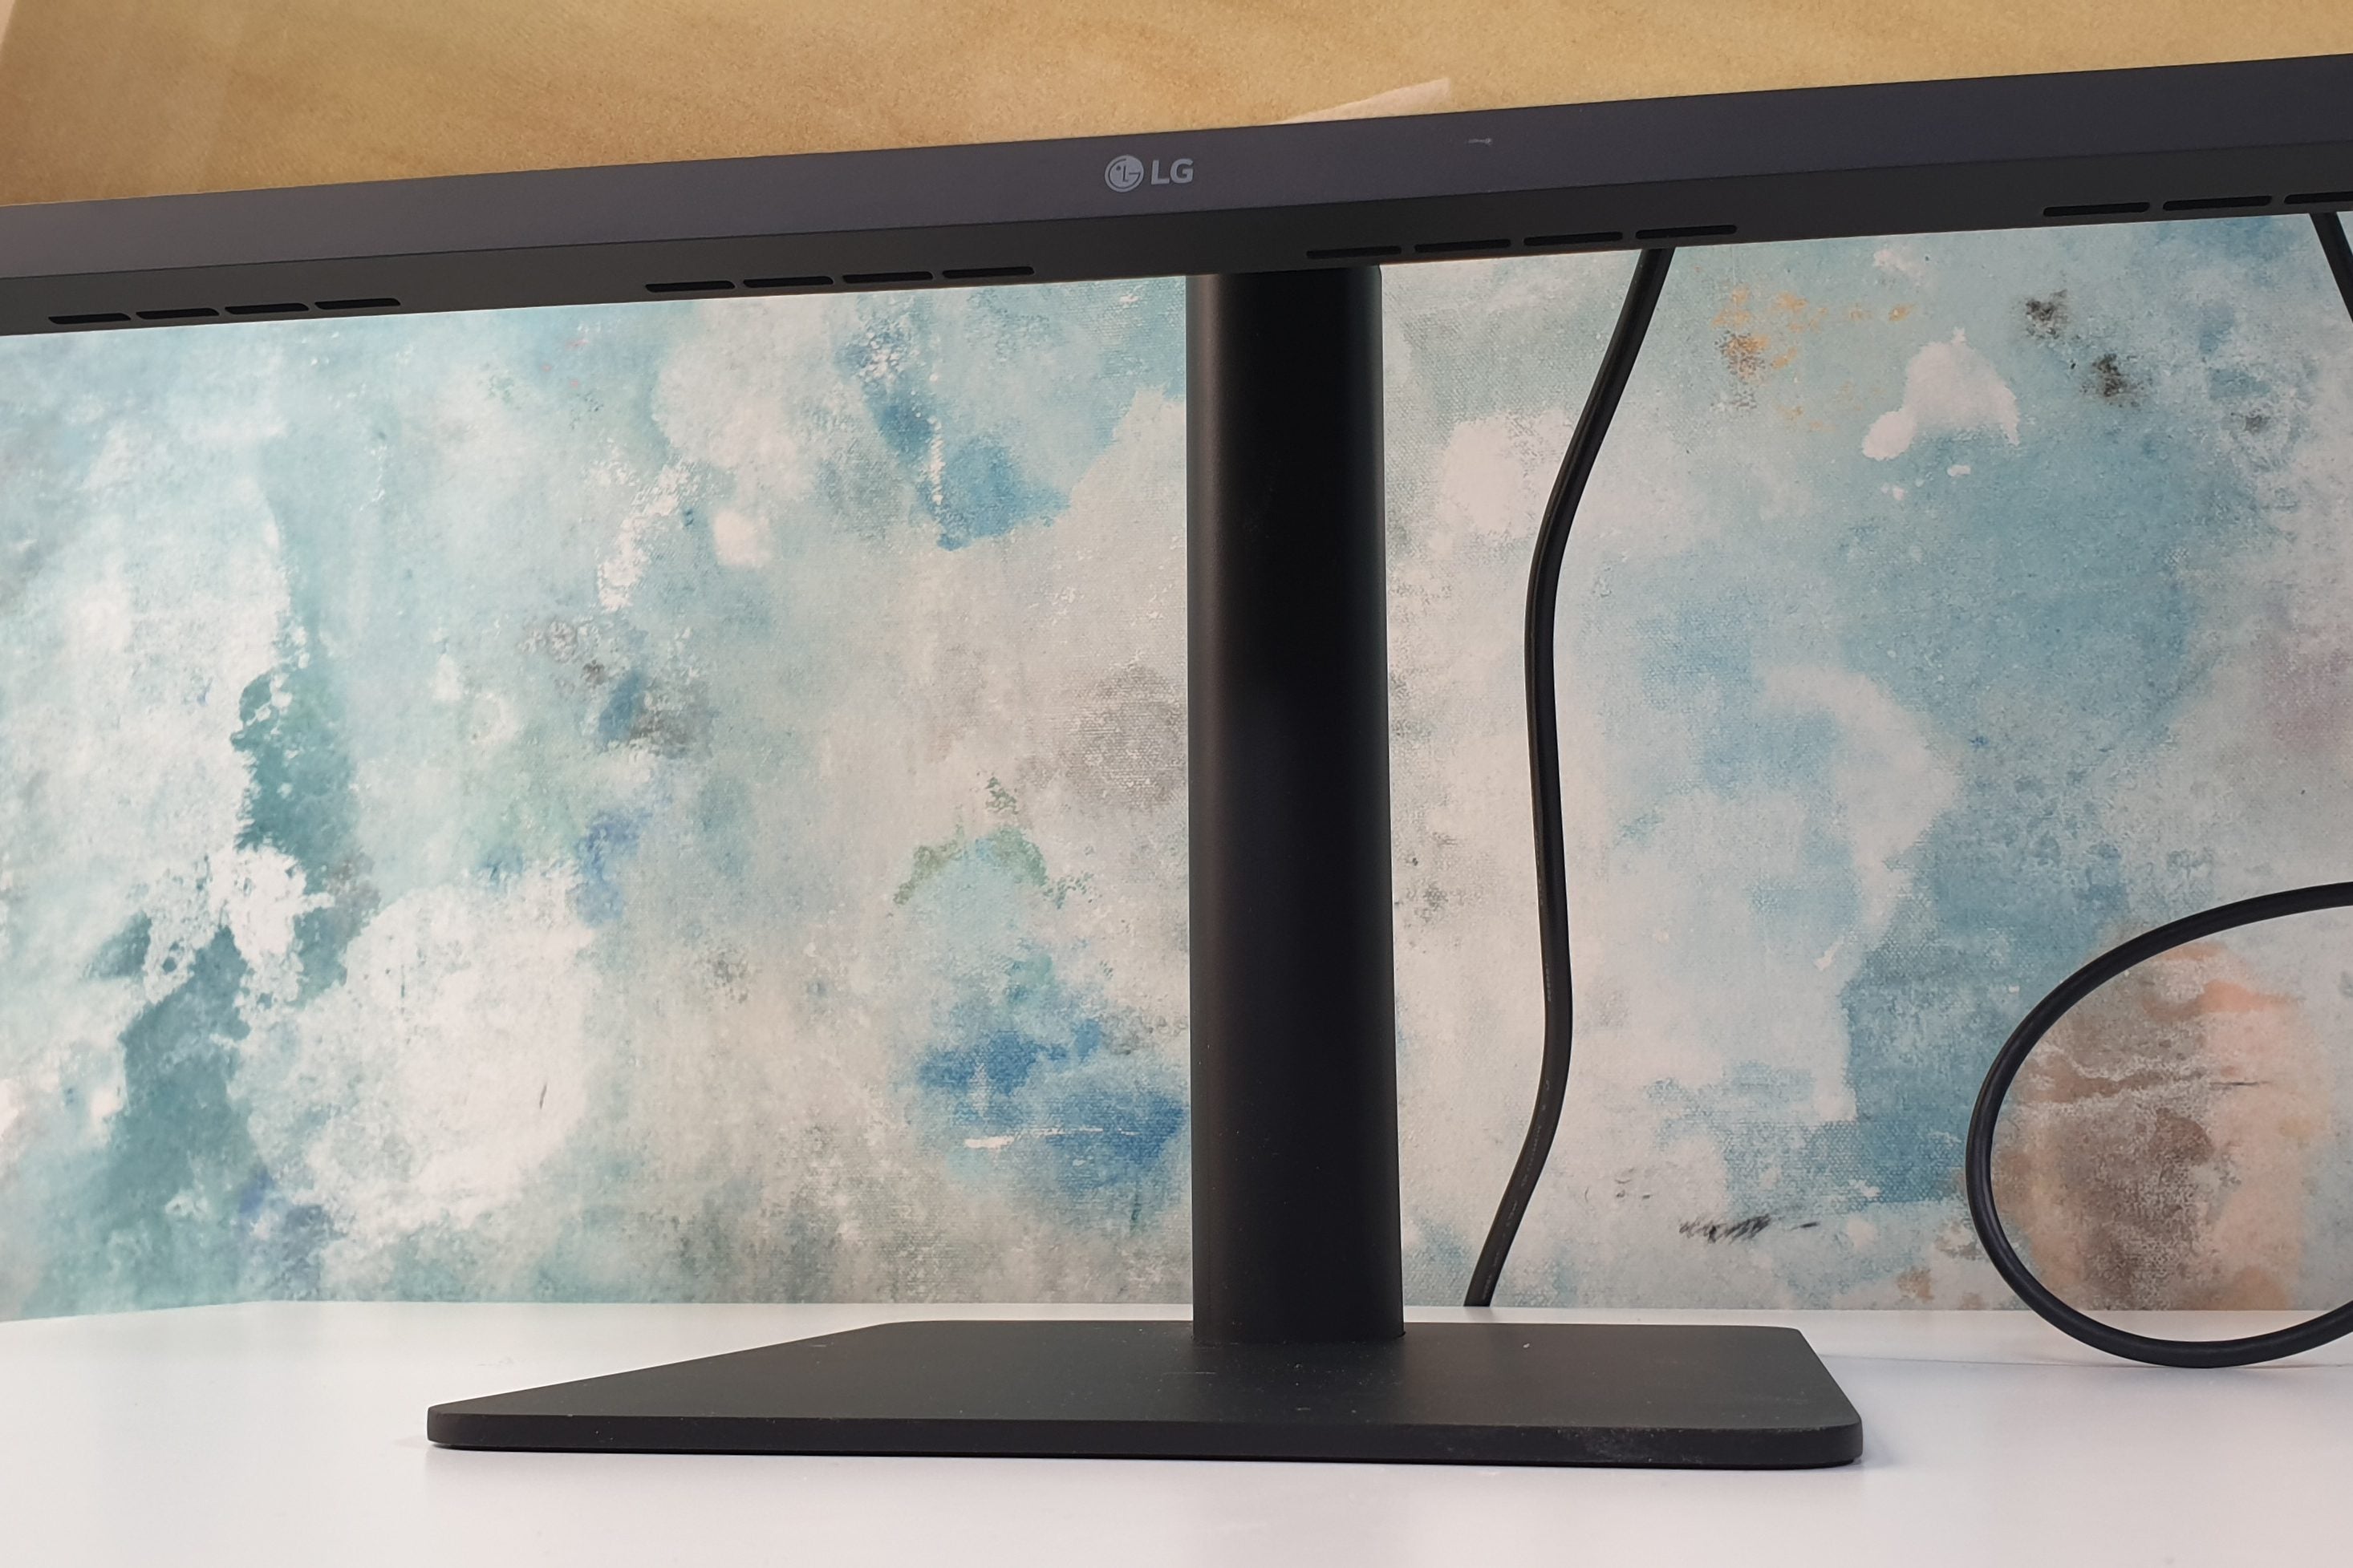 LG UltraFine 4K Display 24MD4KL Review | Trusted Reviews